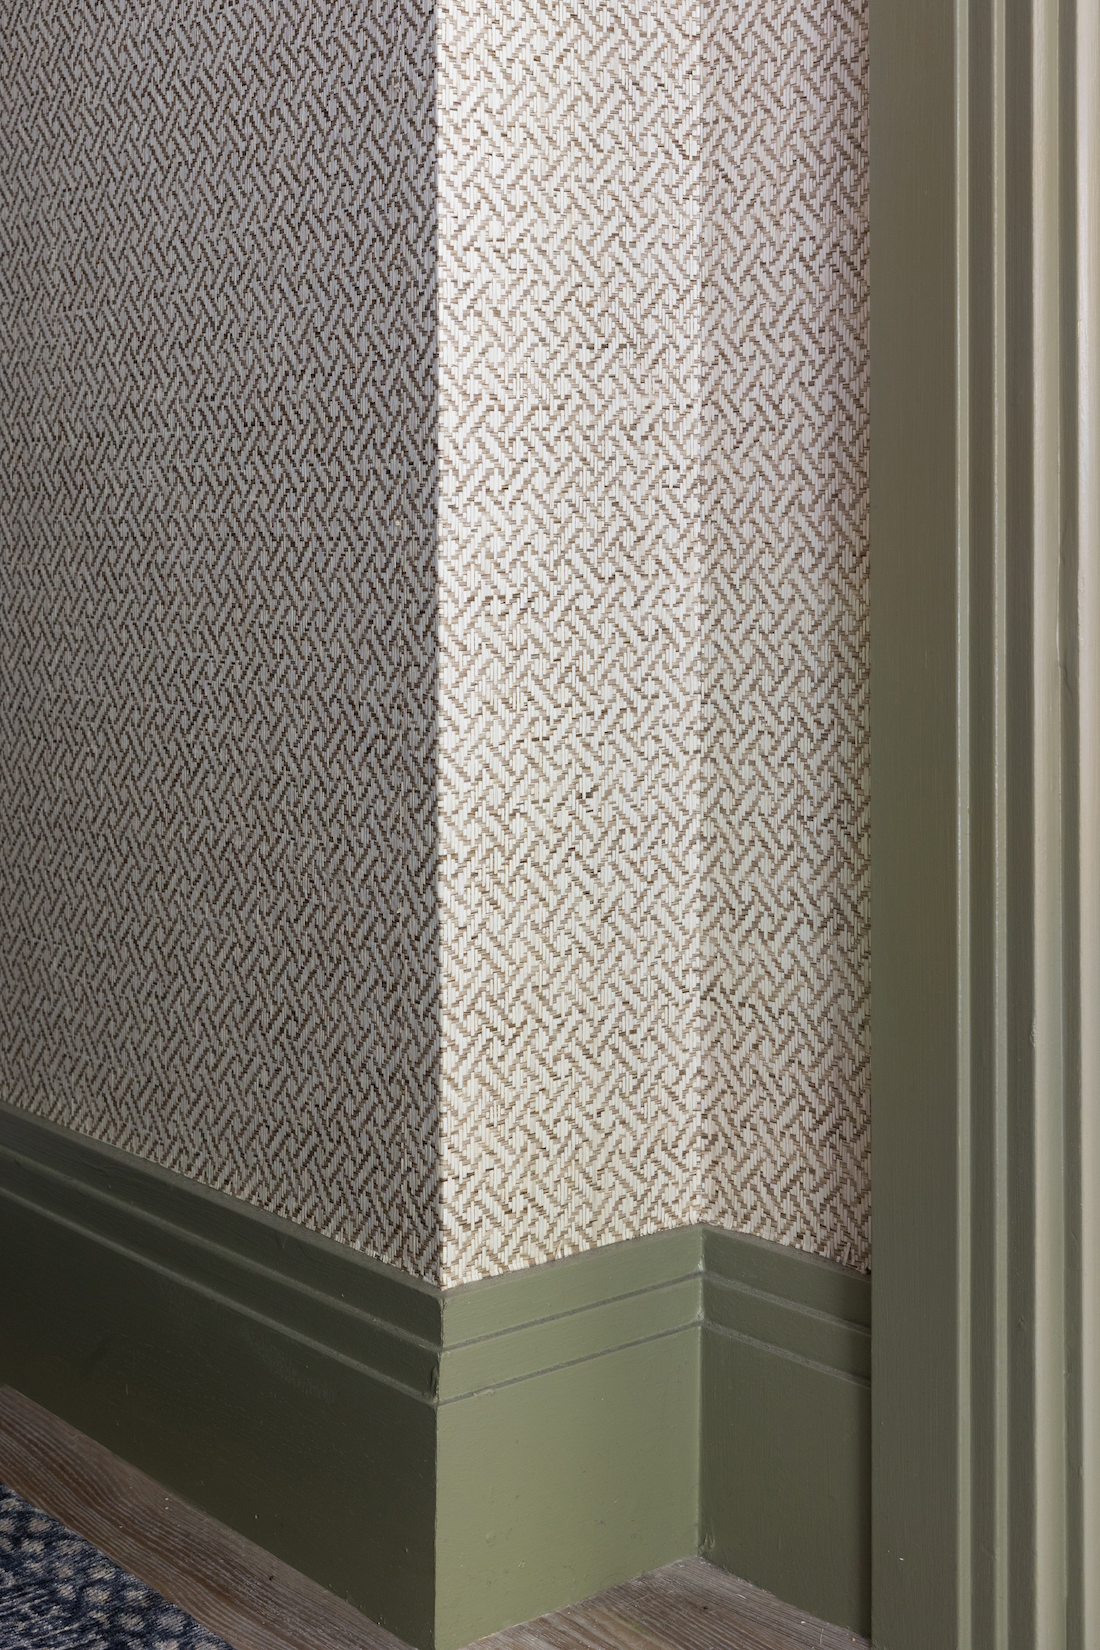 urban contemporary Hallway design with textured Wallcoverings and coloured skirting and architrave